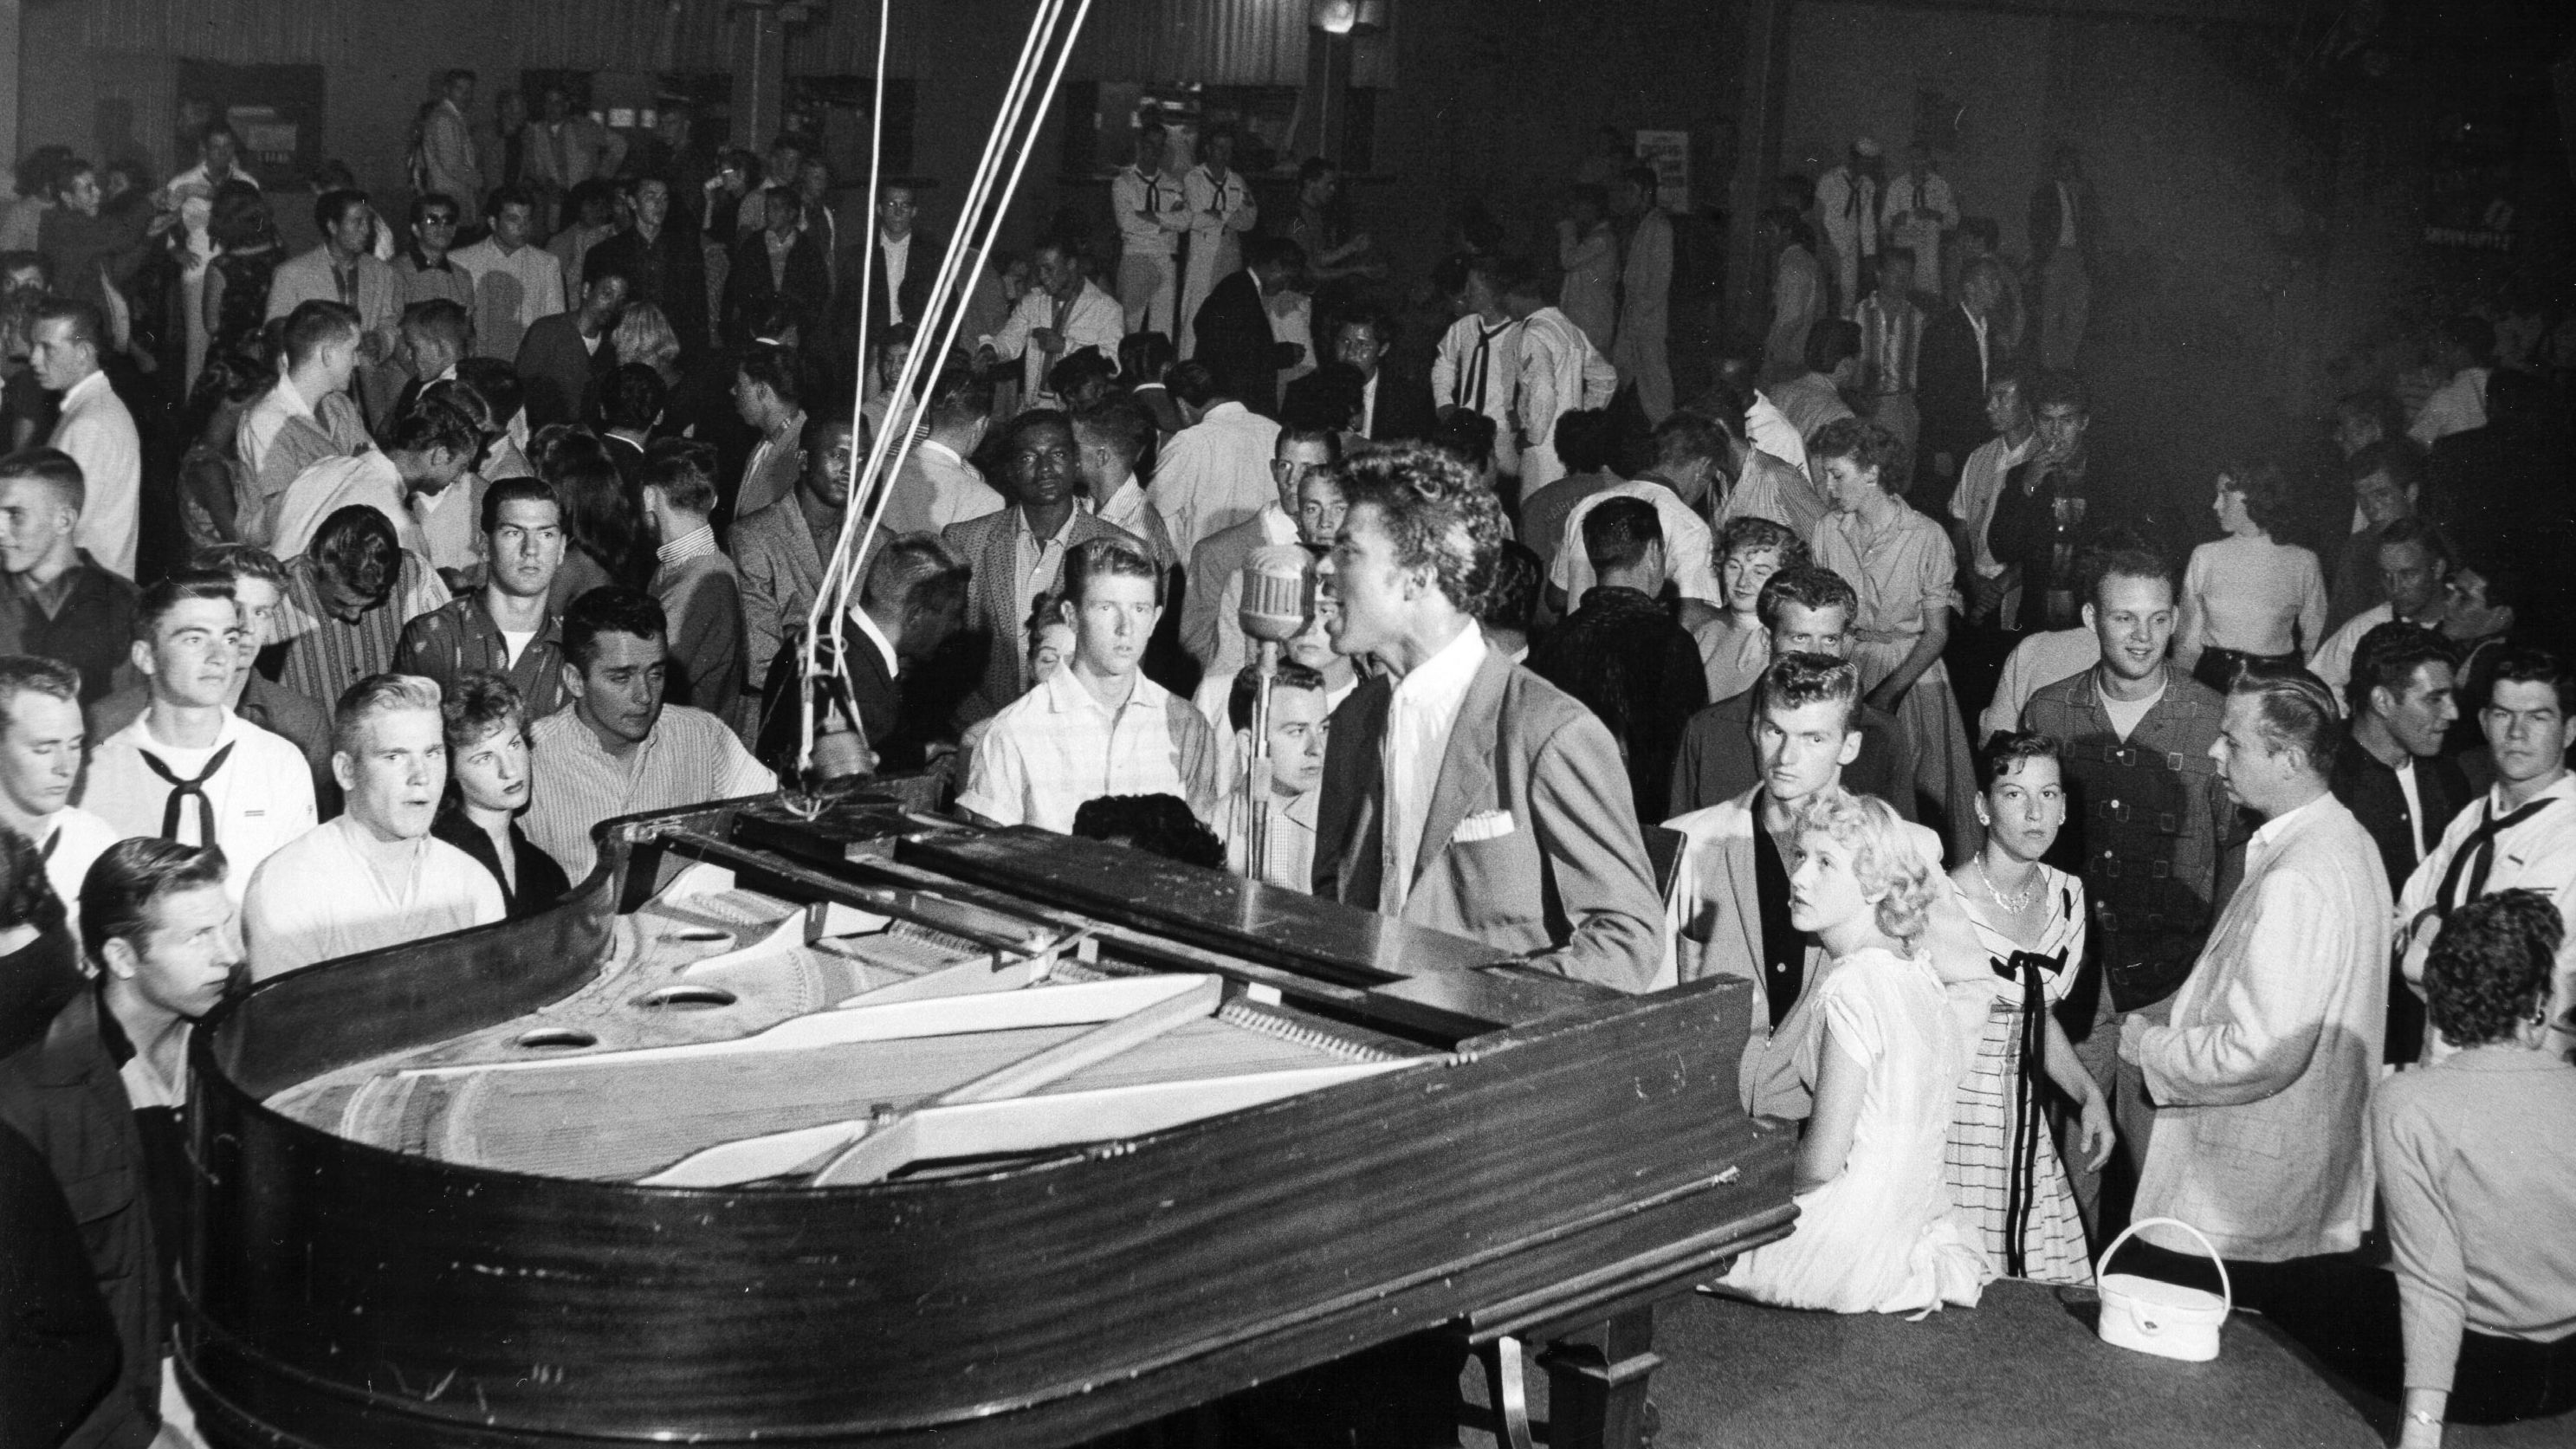 Little Richard performs on stage in 1955.